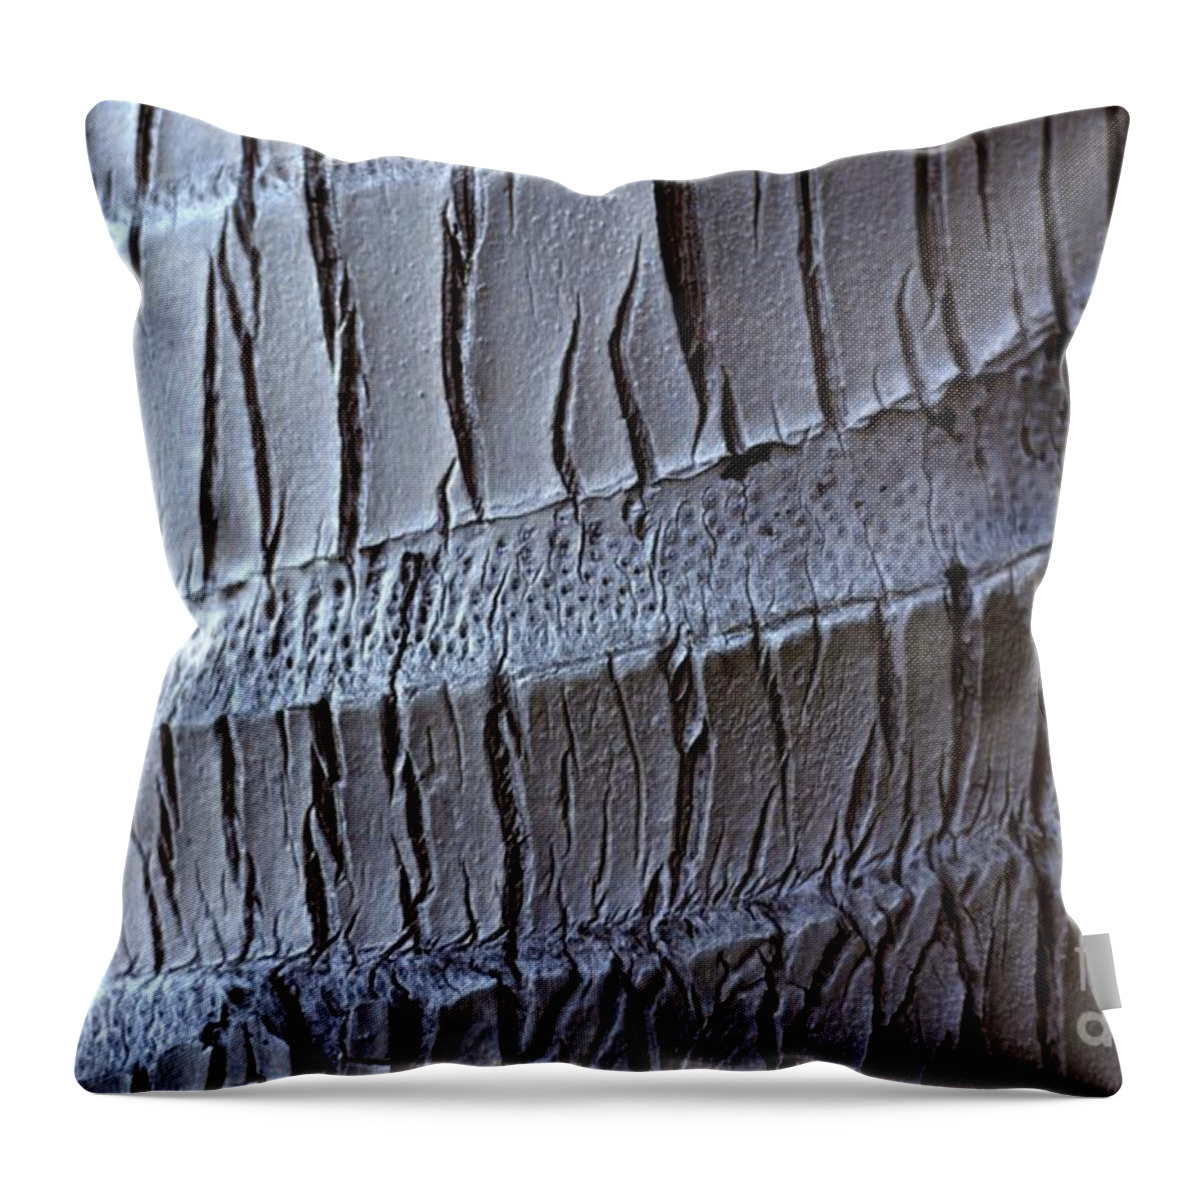 Coconut Palm Throw Pillow featuring the photograph Coconut Palm Bark - Koh Samui by Anna Lisa Yoder